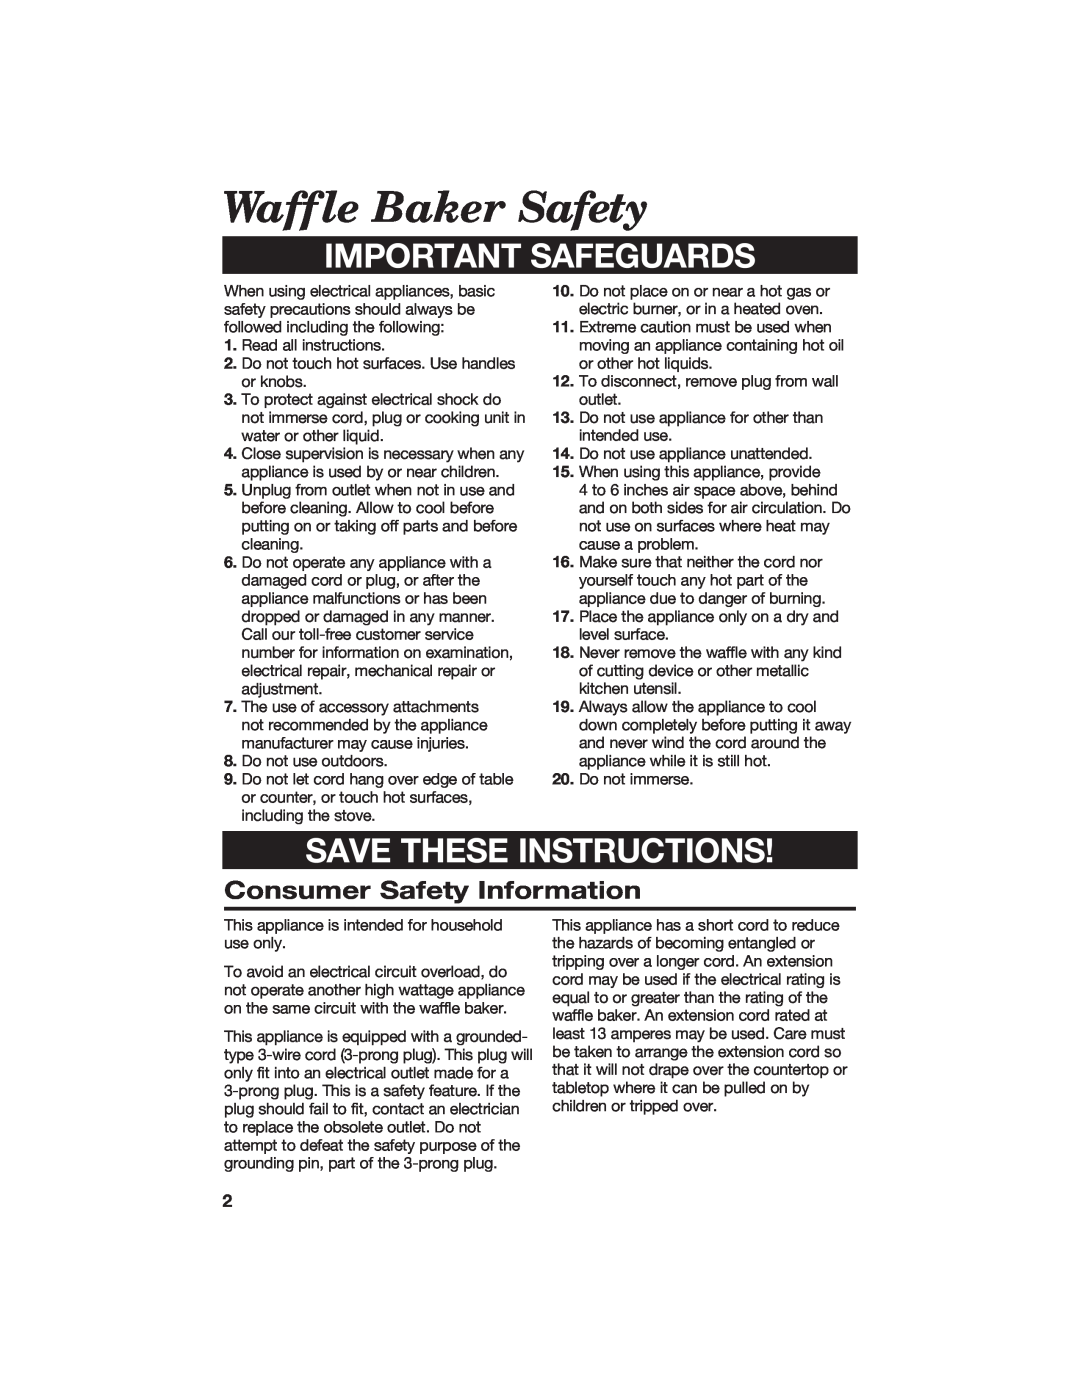 Hamilton Beach 840056800 Waffle Baker Safety, Consumer Safety Information, Important Safeguards, Save These Instructions 